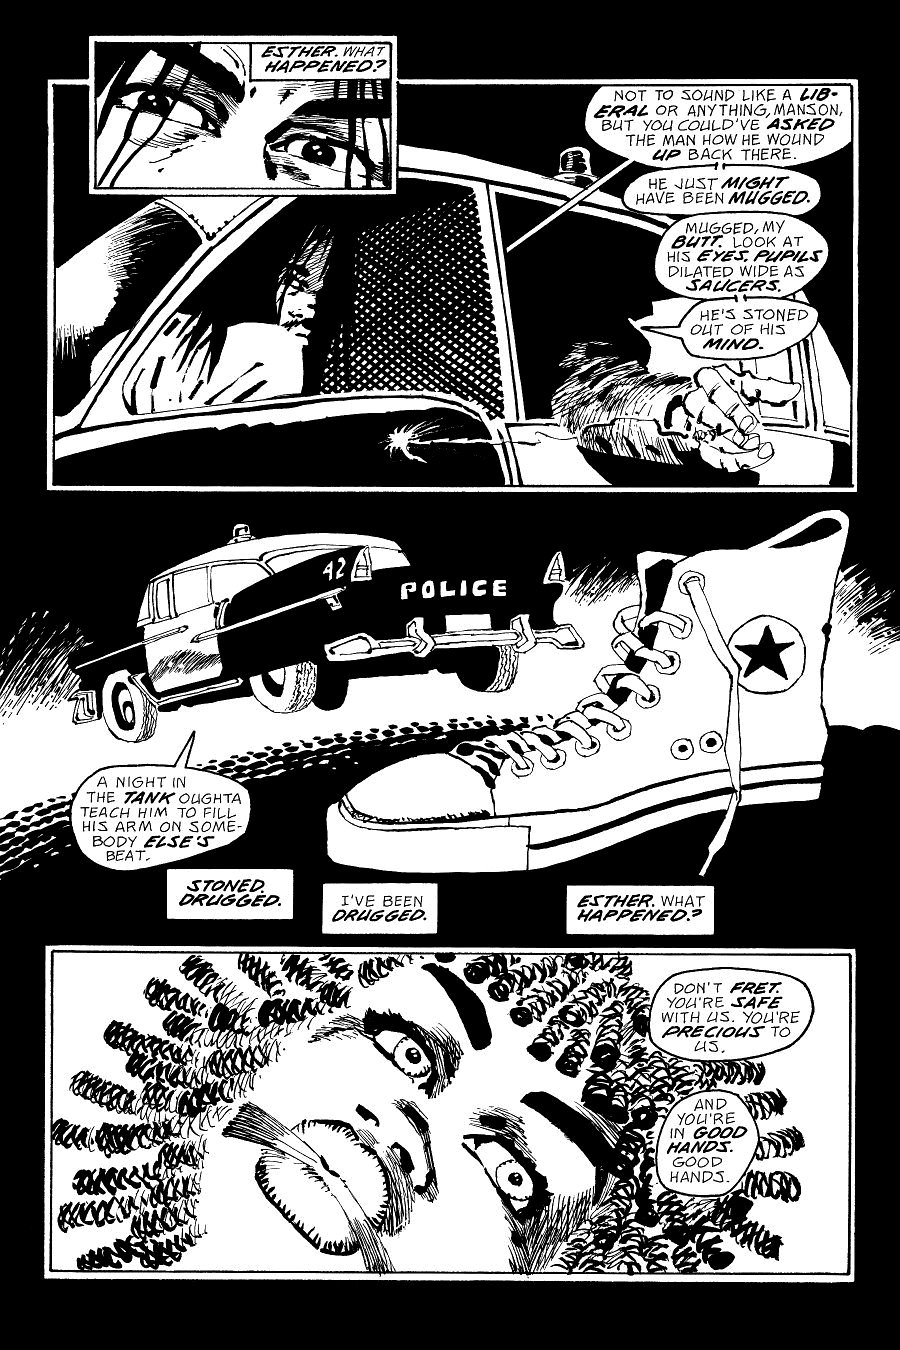 page 43 of sin city 7 hell and back